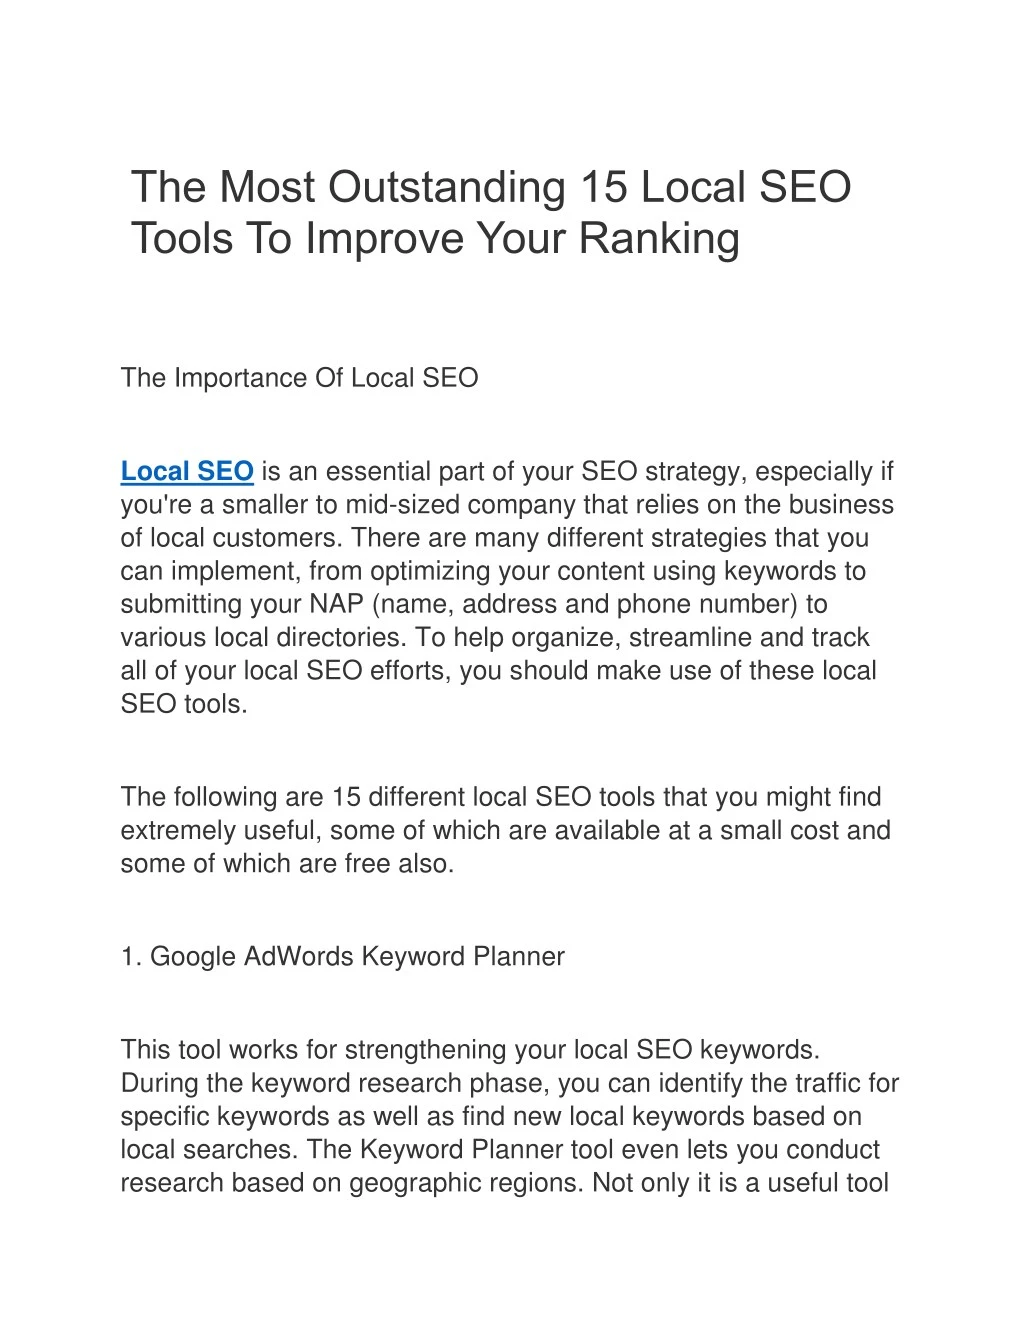 the most outstanding 15 local seo tools